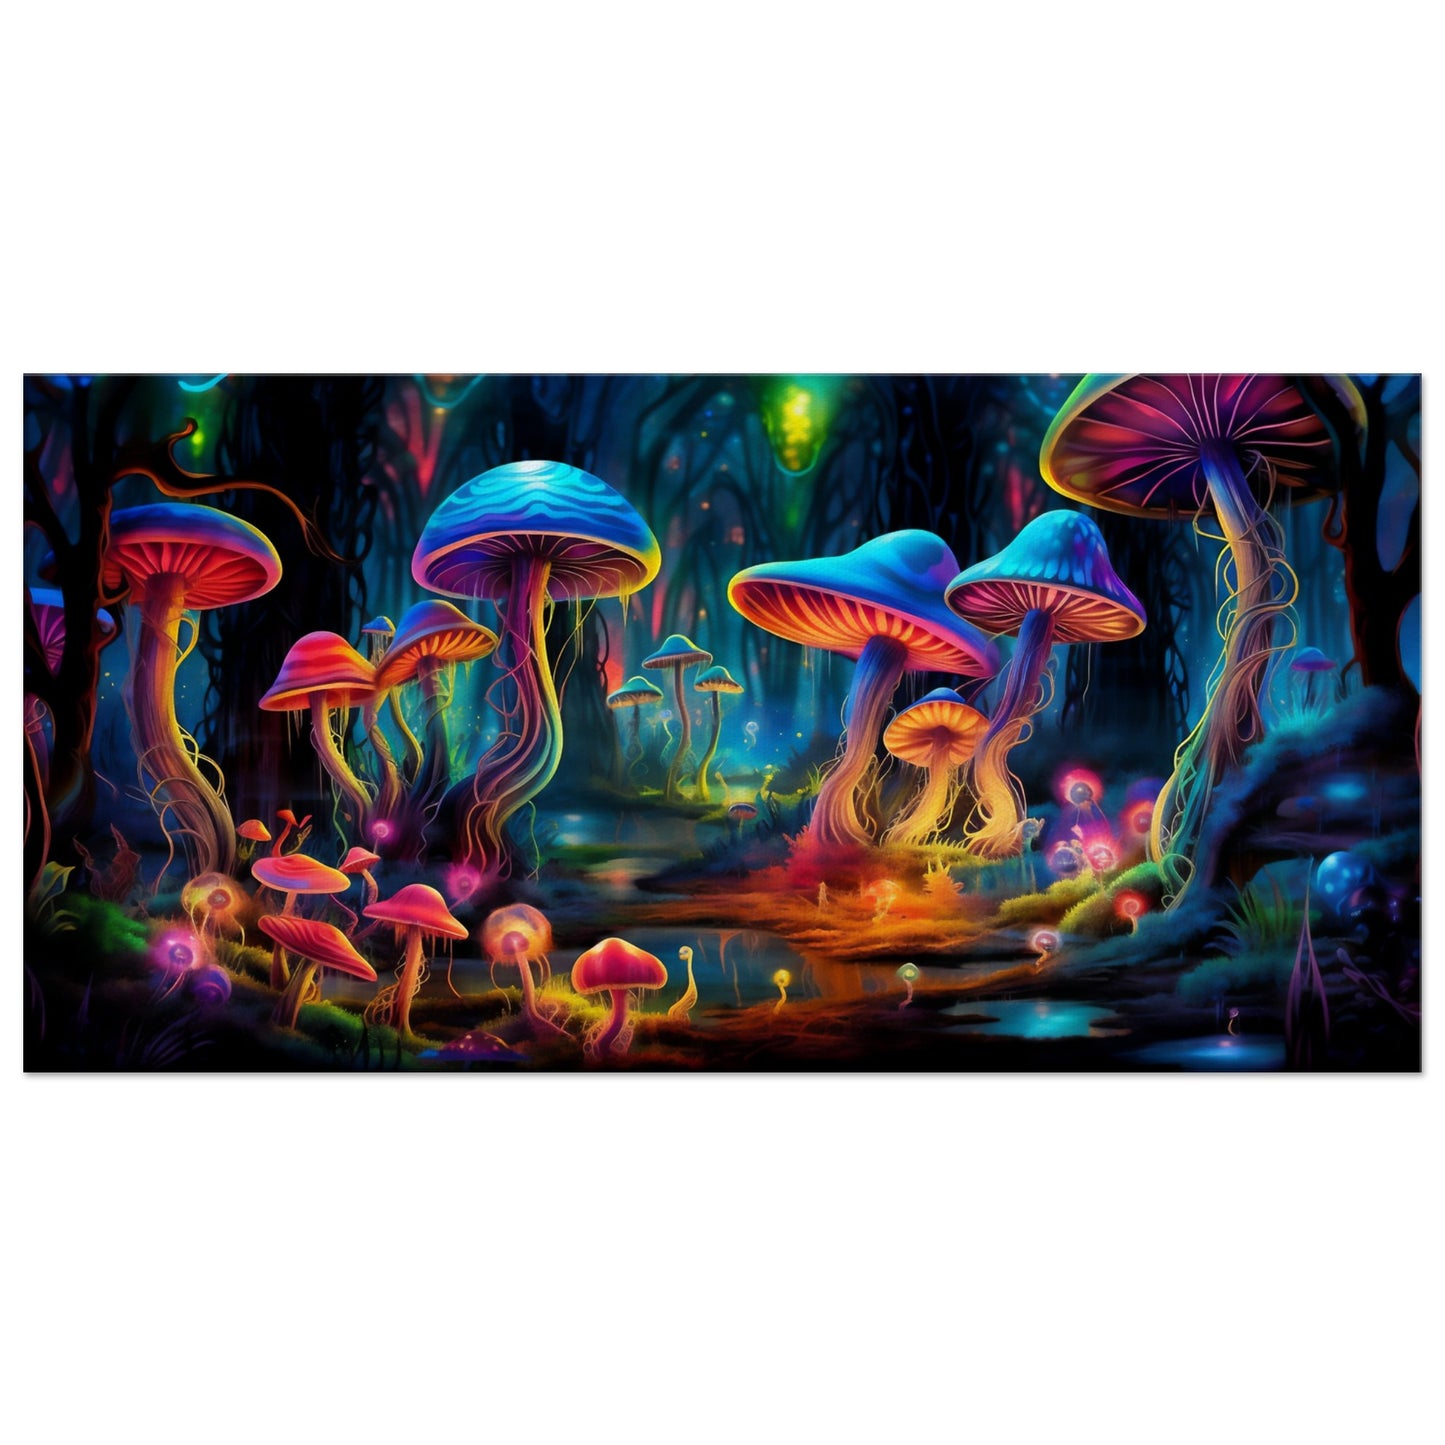 Psychedelic Art | Magic Mushrooms Canvas Wall Decor - Trippy Art for Mind-Bending Experiences